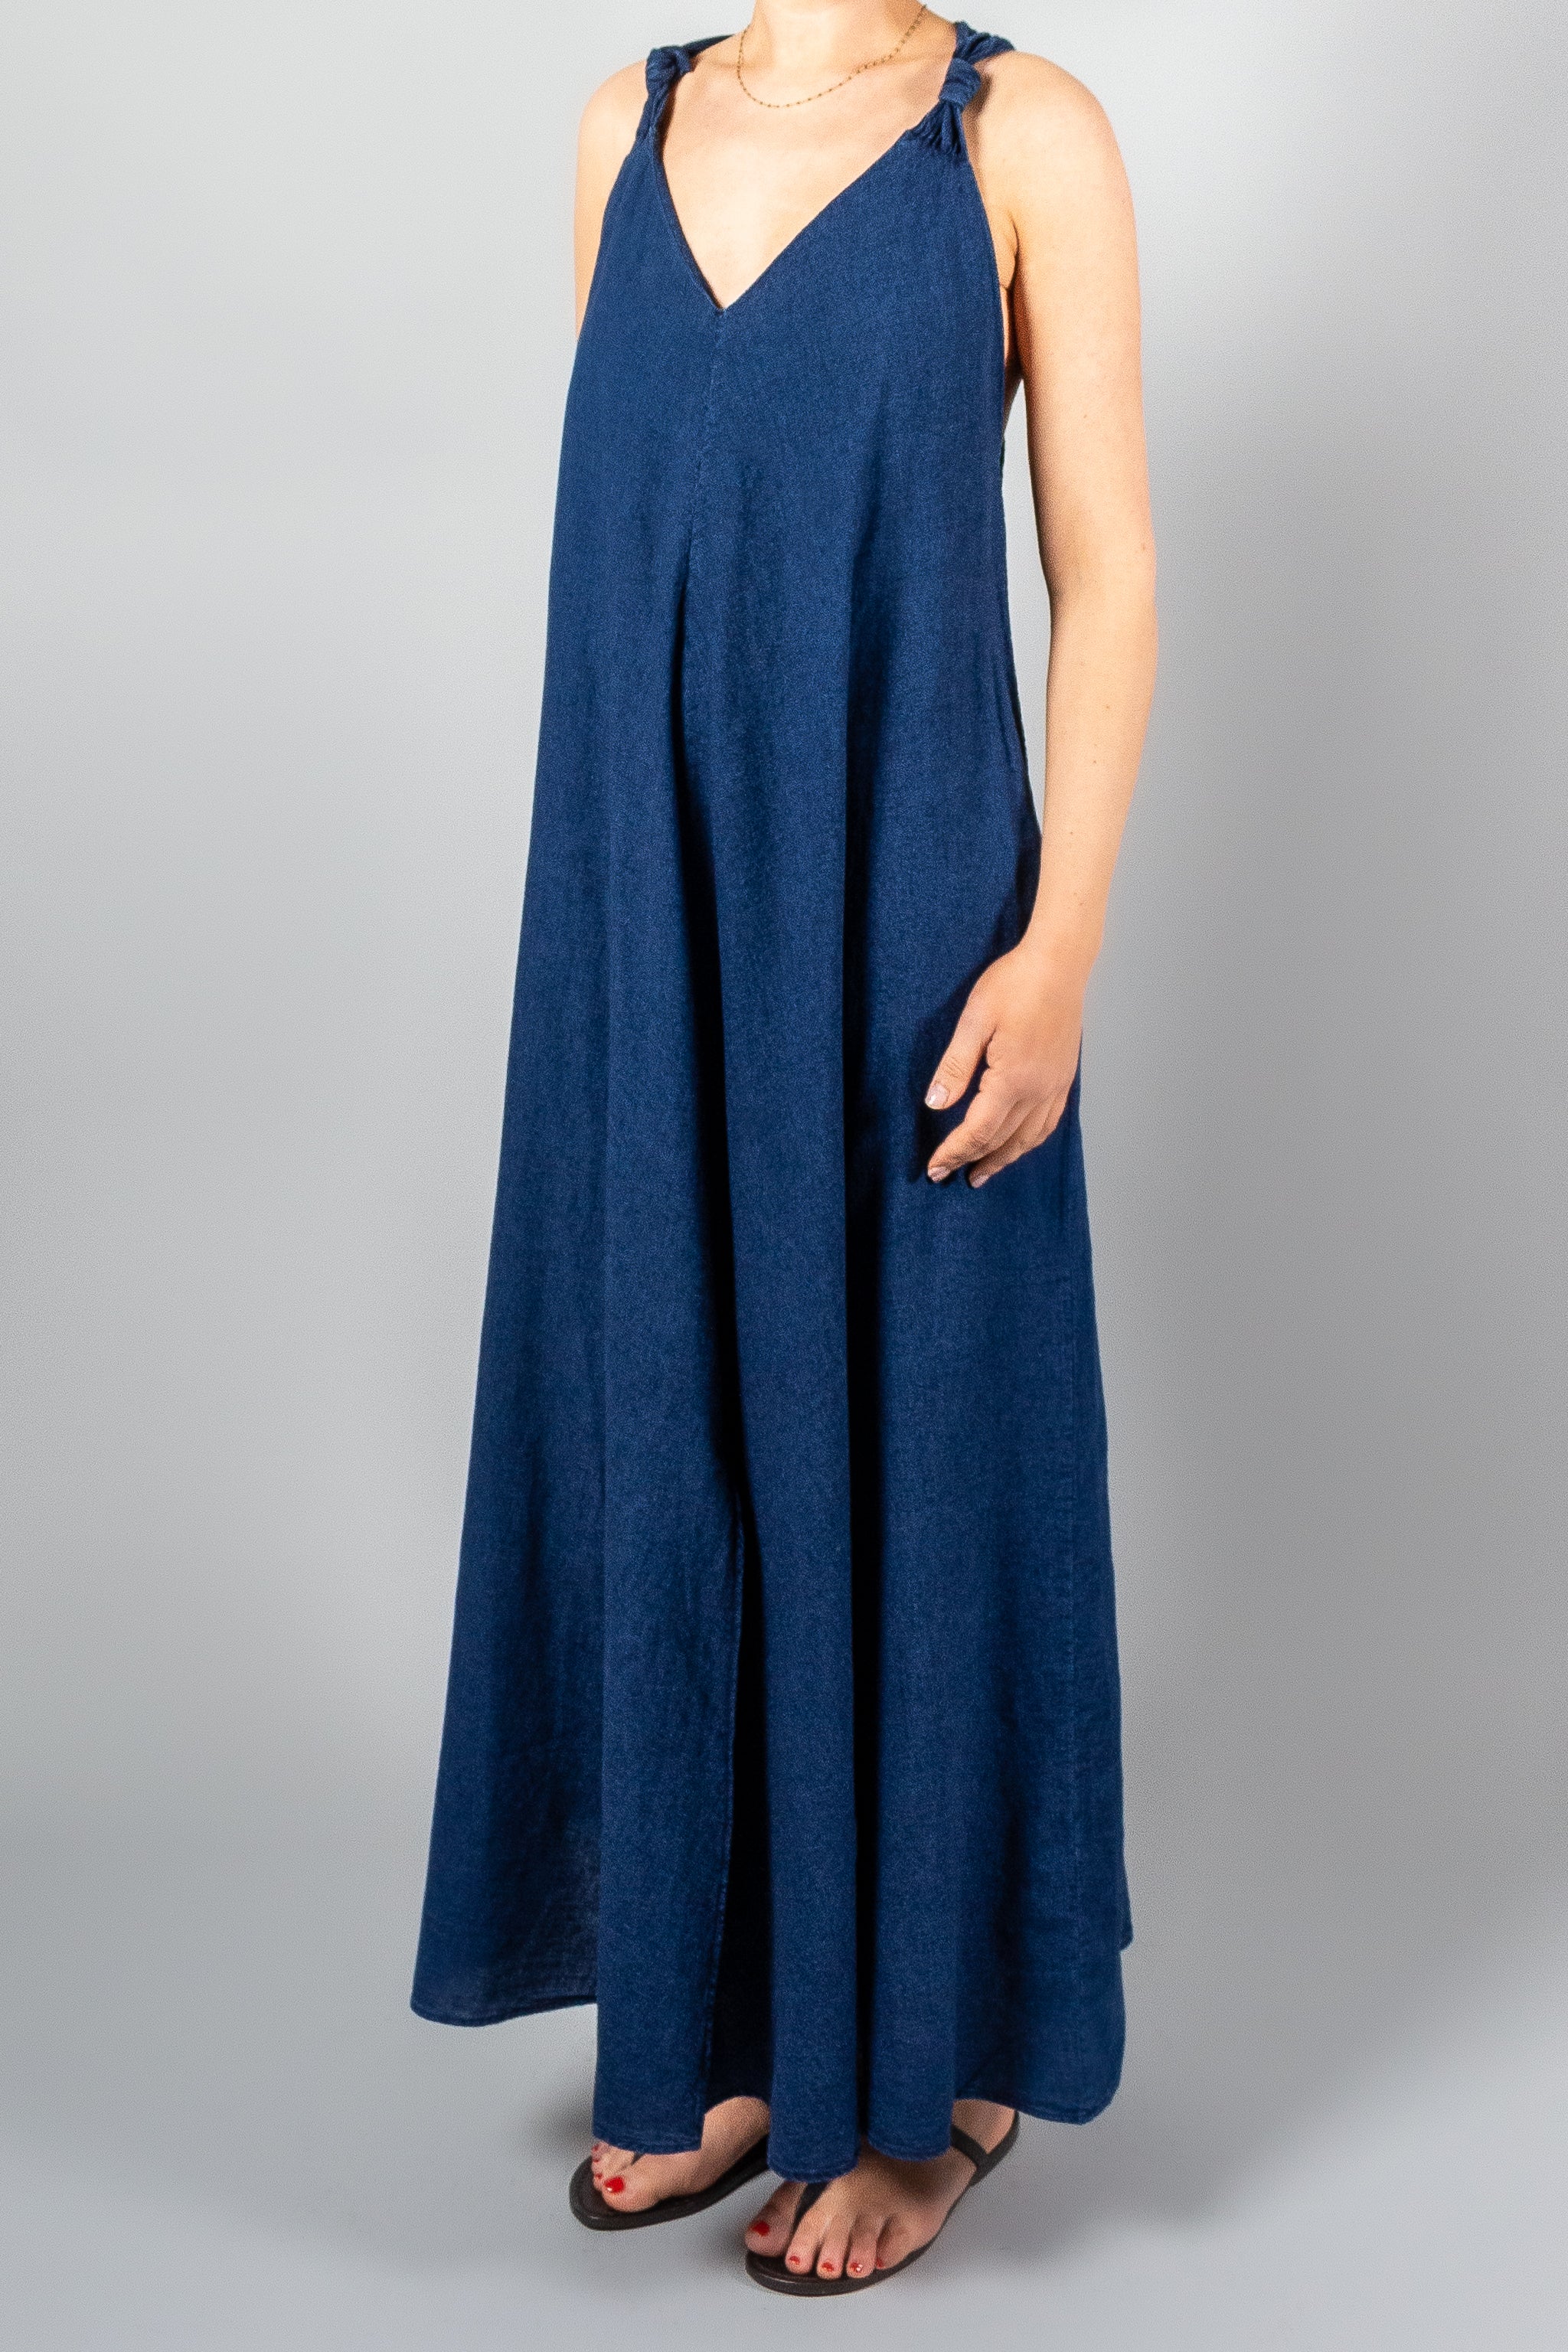 Closed Knotted Maxi Dress-Dresses and Jumpsuits-Misch-Boutique-Vancouver-Canada-misch.ca